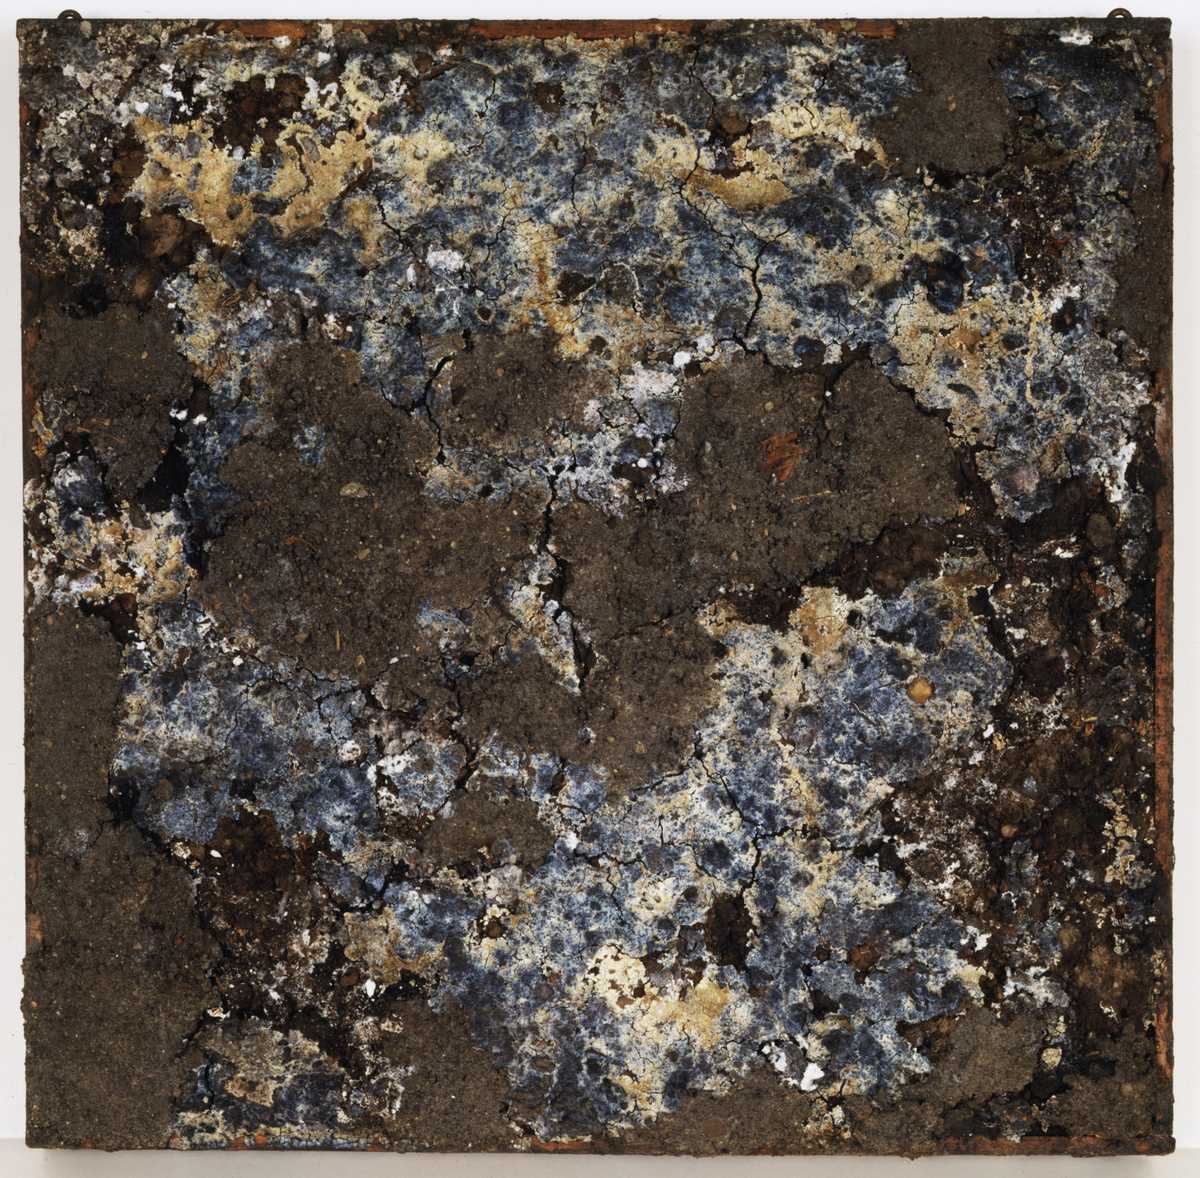 A square artwork that looks like cracked dirt with blue metal and shine showing through.